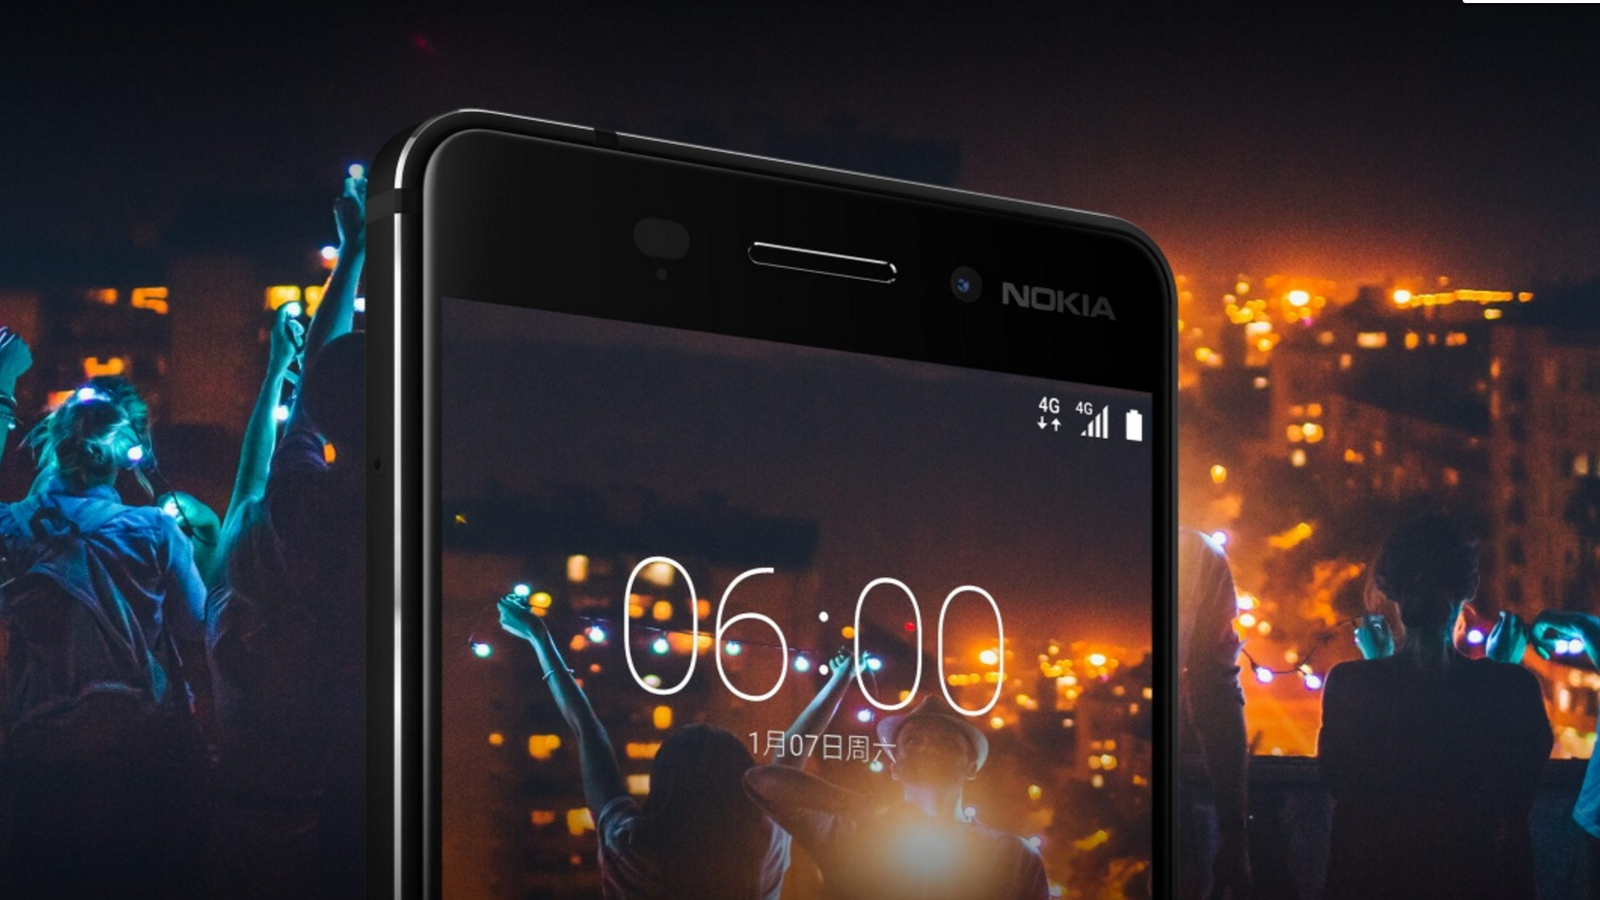 Nokia 6 out in the UK SIM free for £200